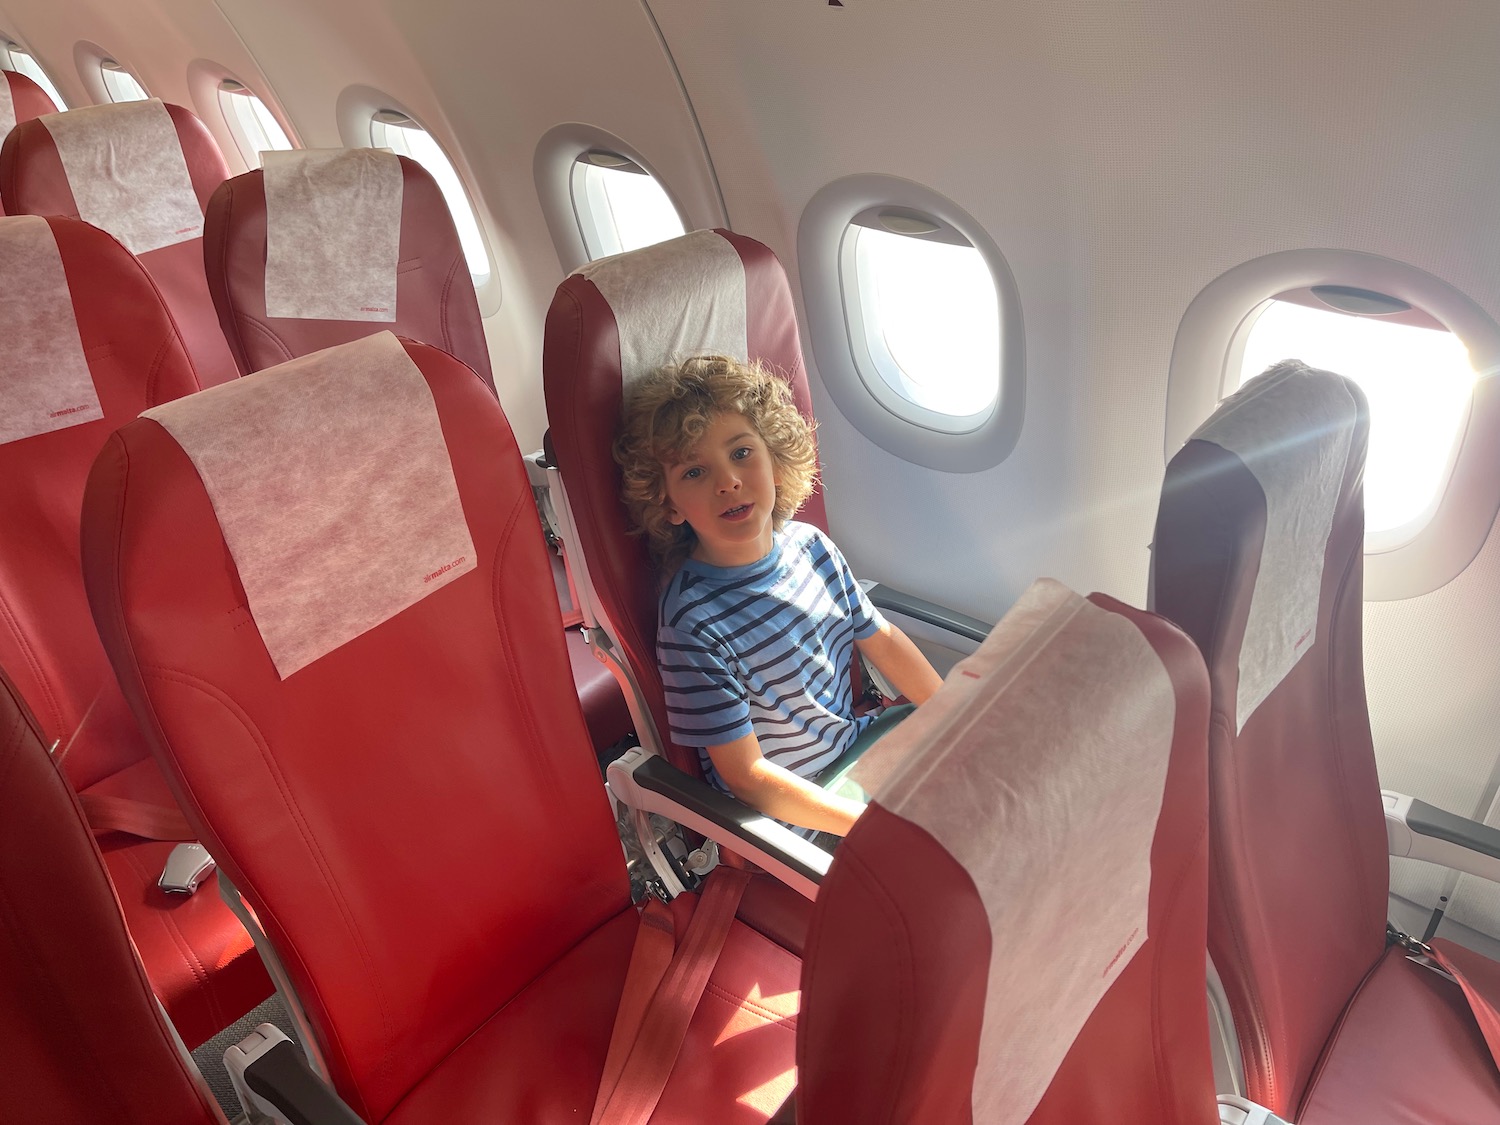 a boy sitting in a chair on an airplane